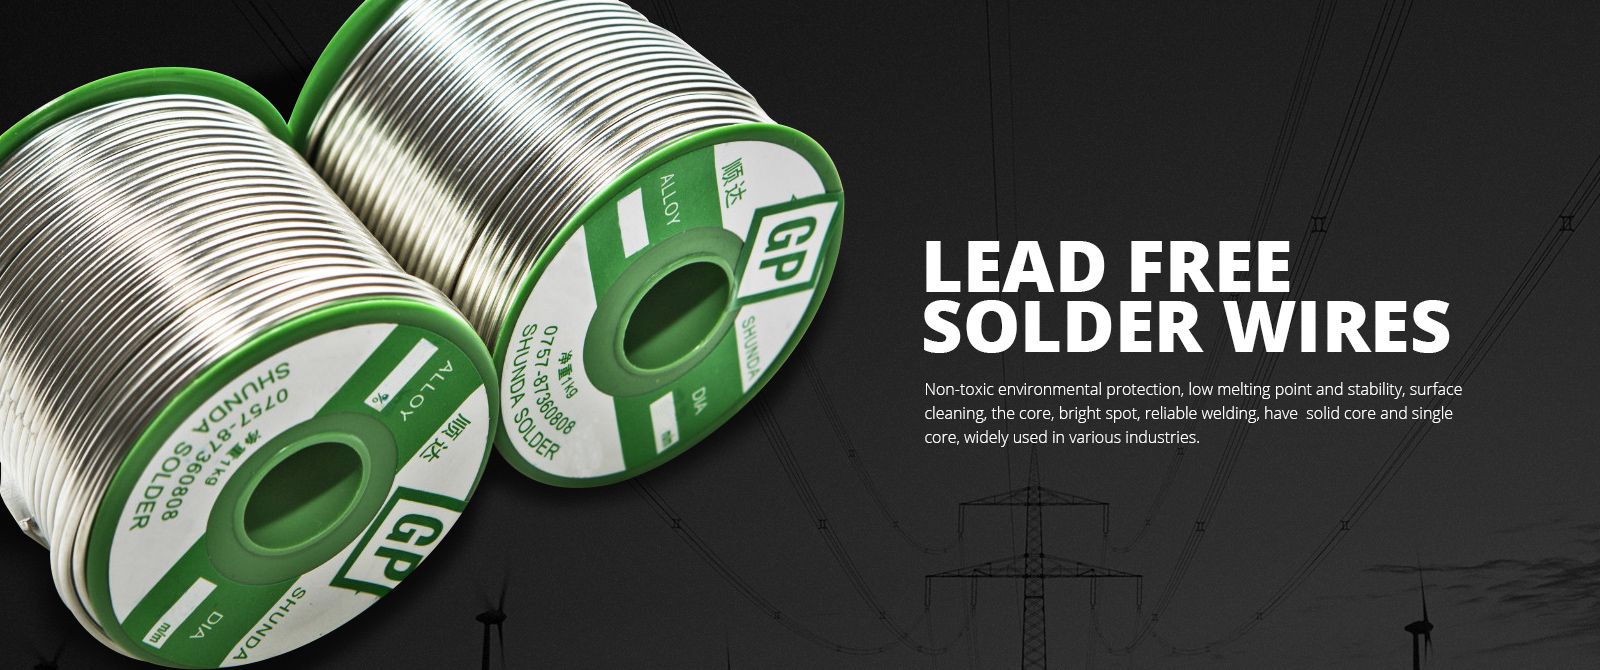 Lead Free Solder(Wires)